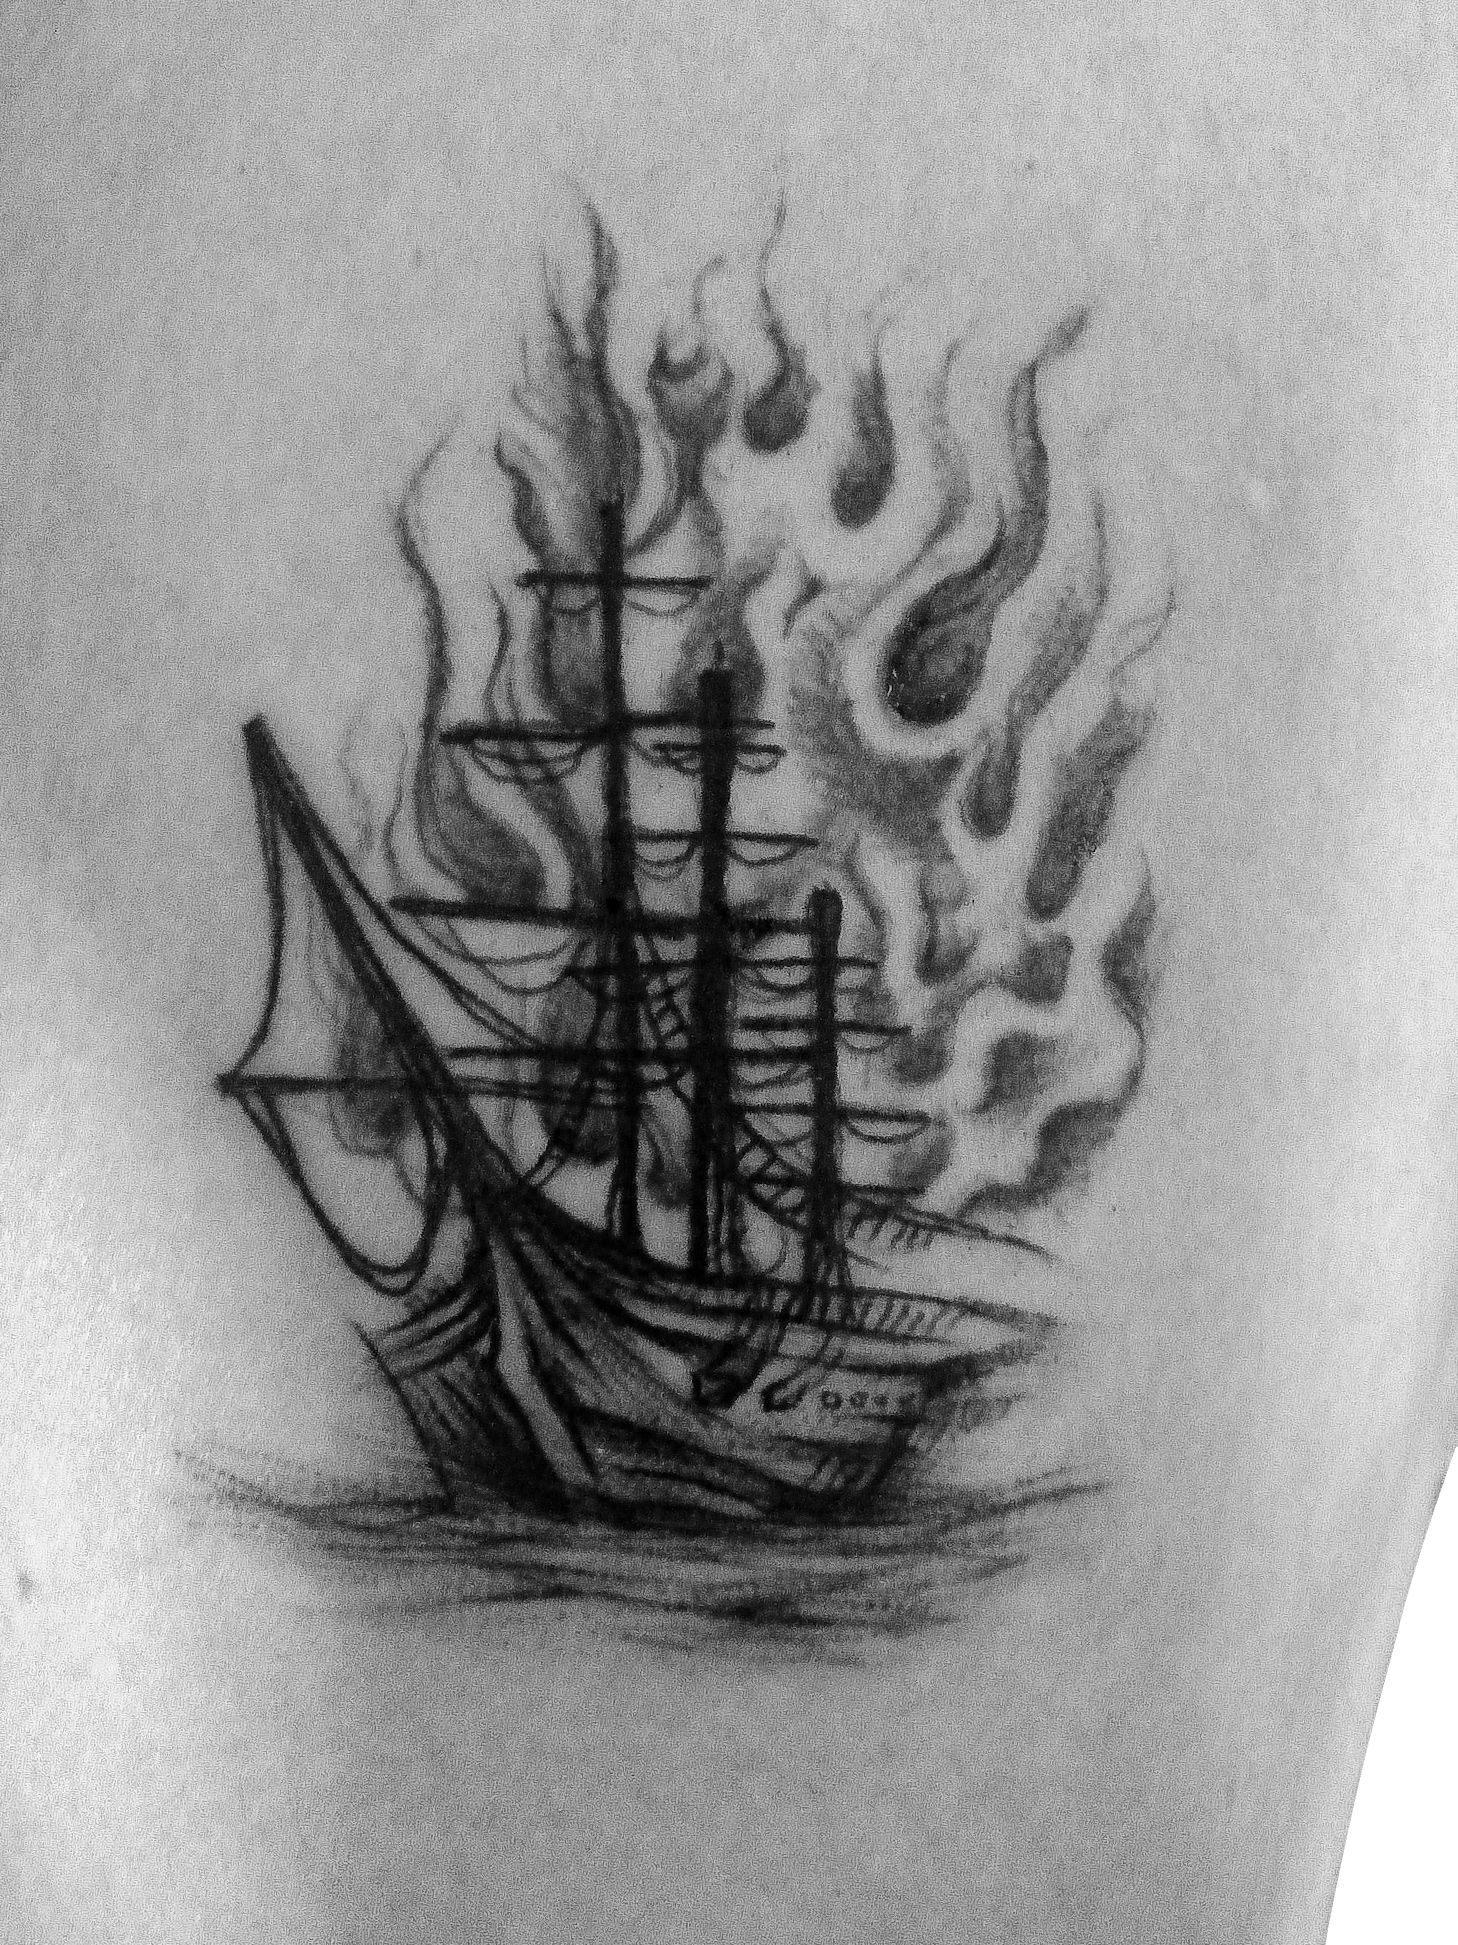 This ship by Cody is the ship lordsoul666  Finished burning ship  today stlouis cherokeestreet  Ship tattoo Boat tattoo Arm tattoos for  guys